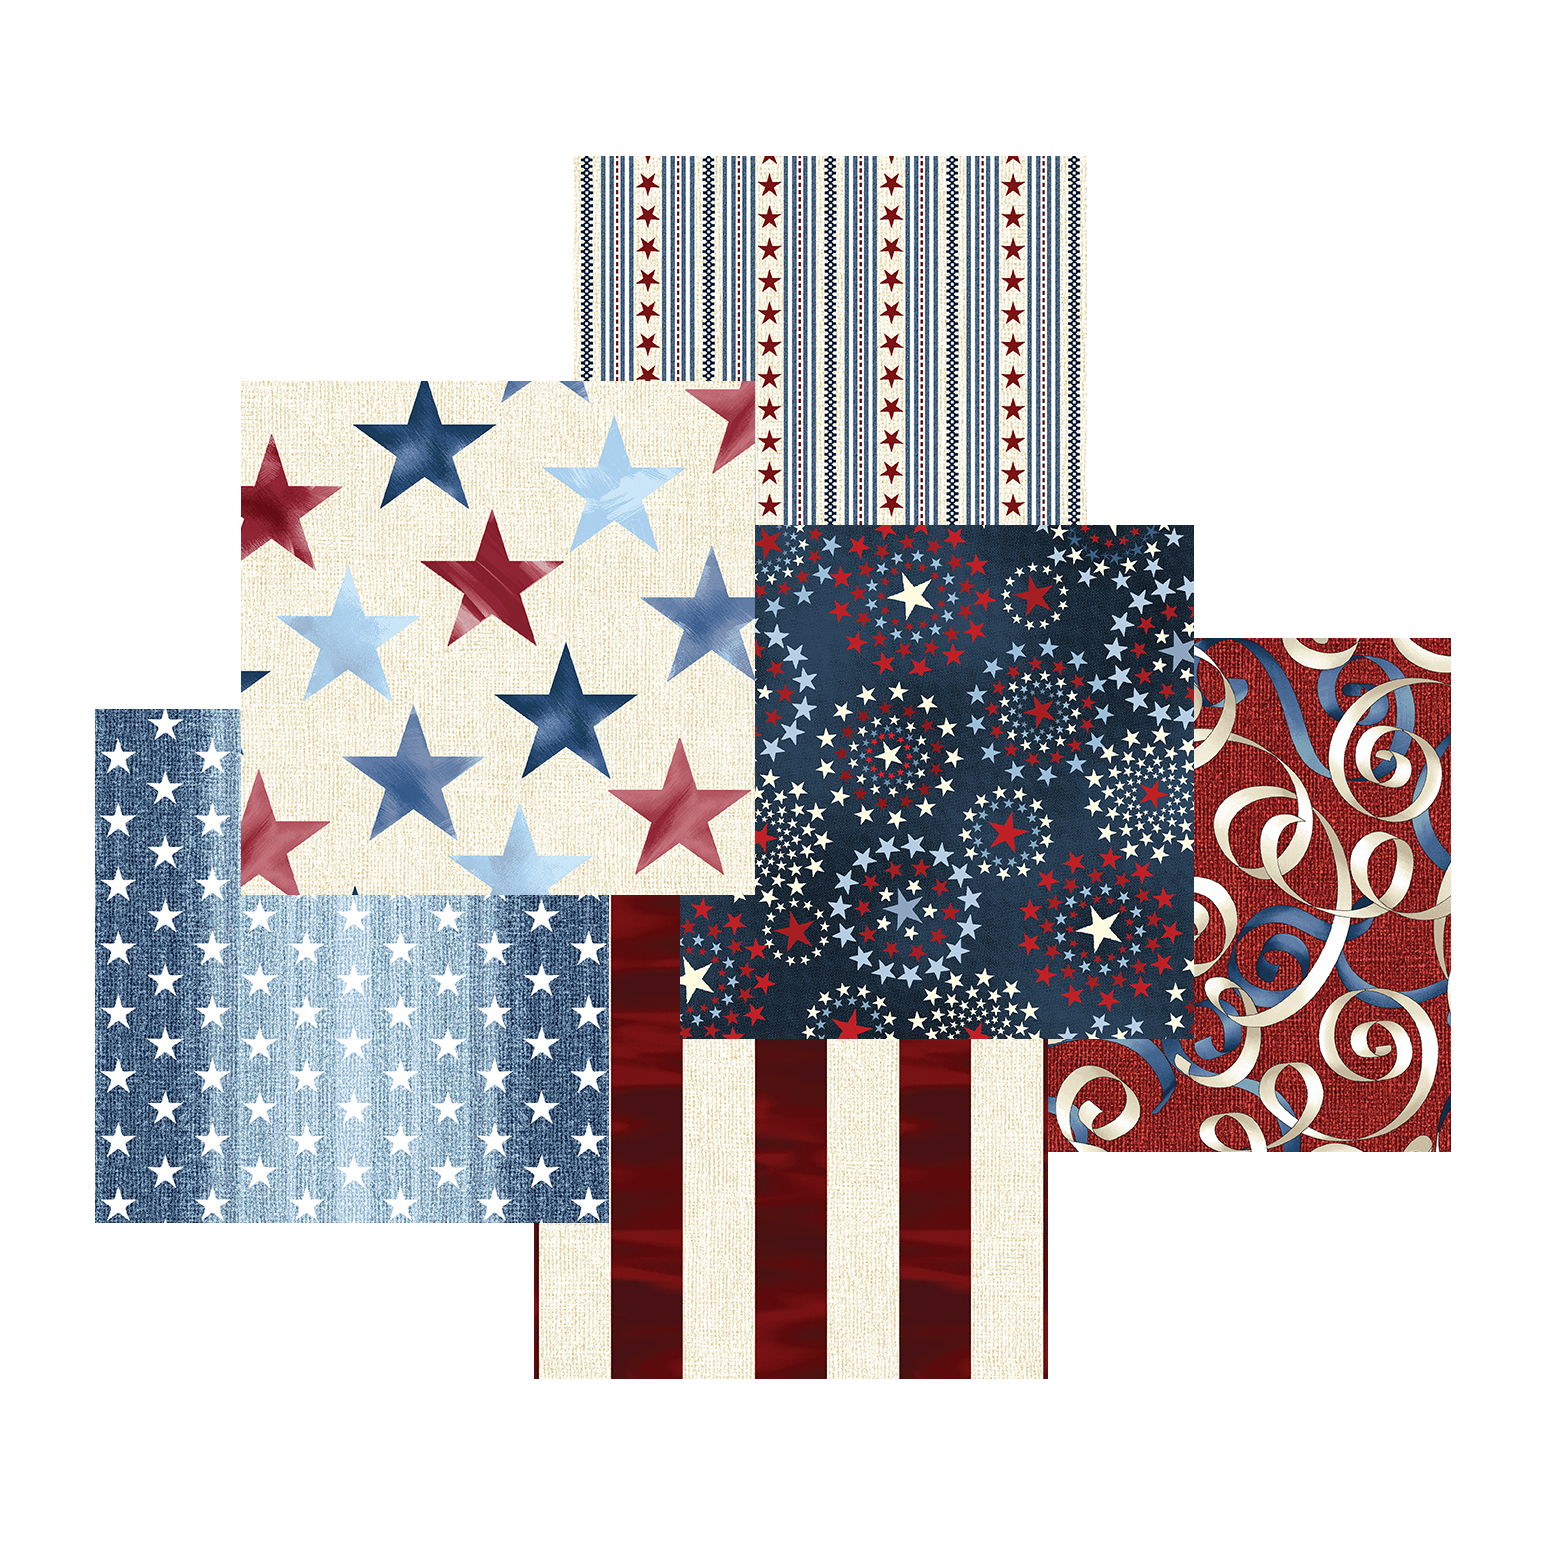 Sew in Love {with Fabric}: Thanking our Veterans